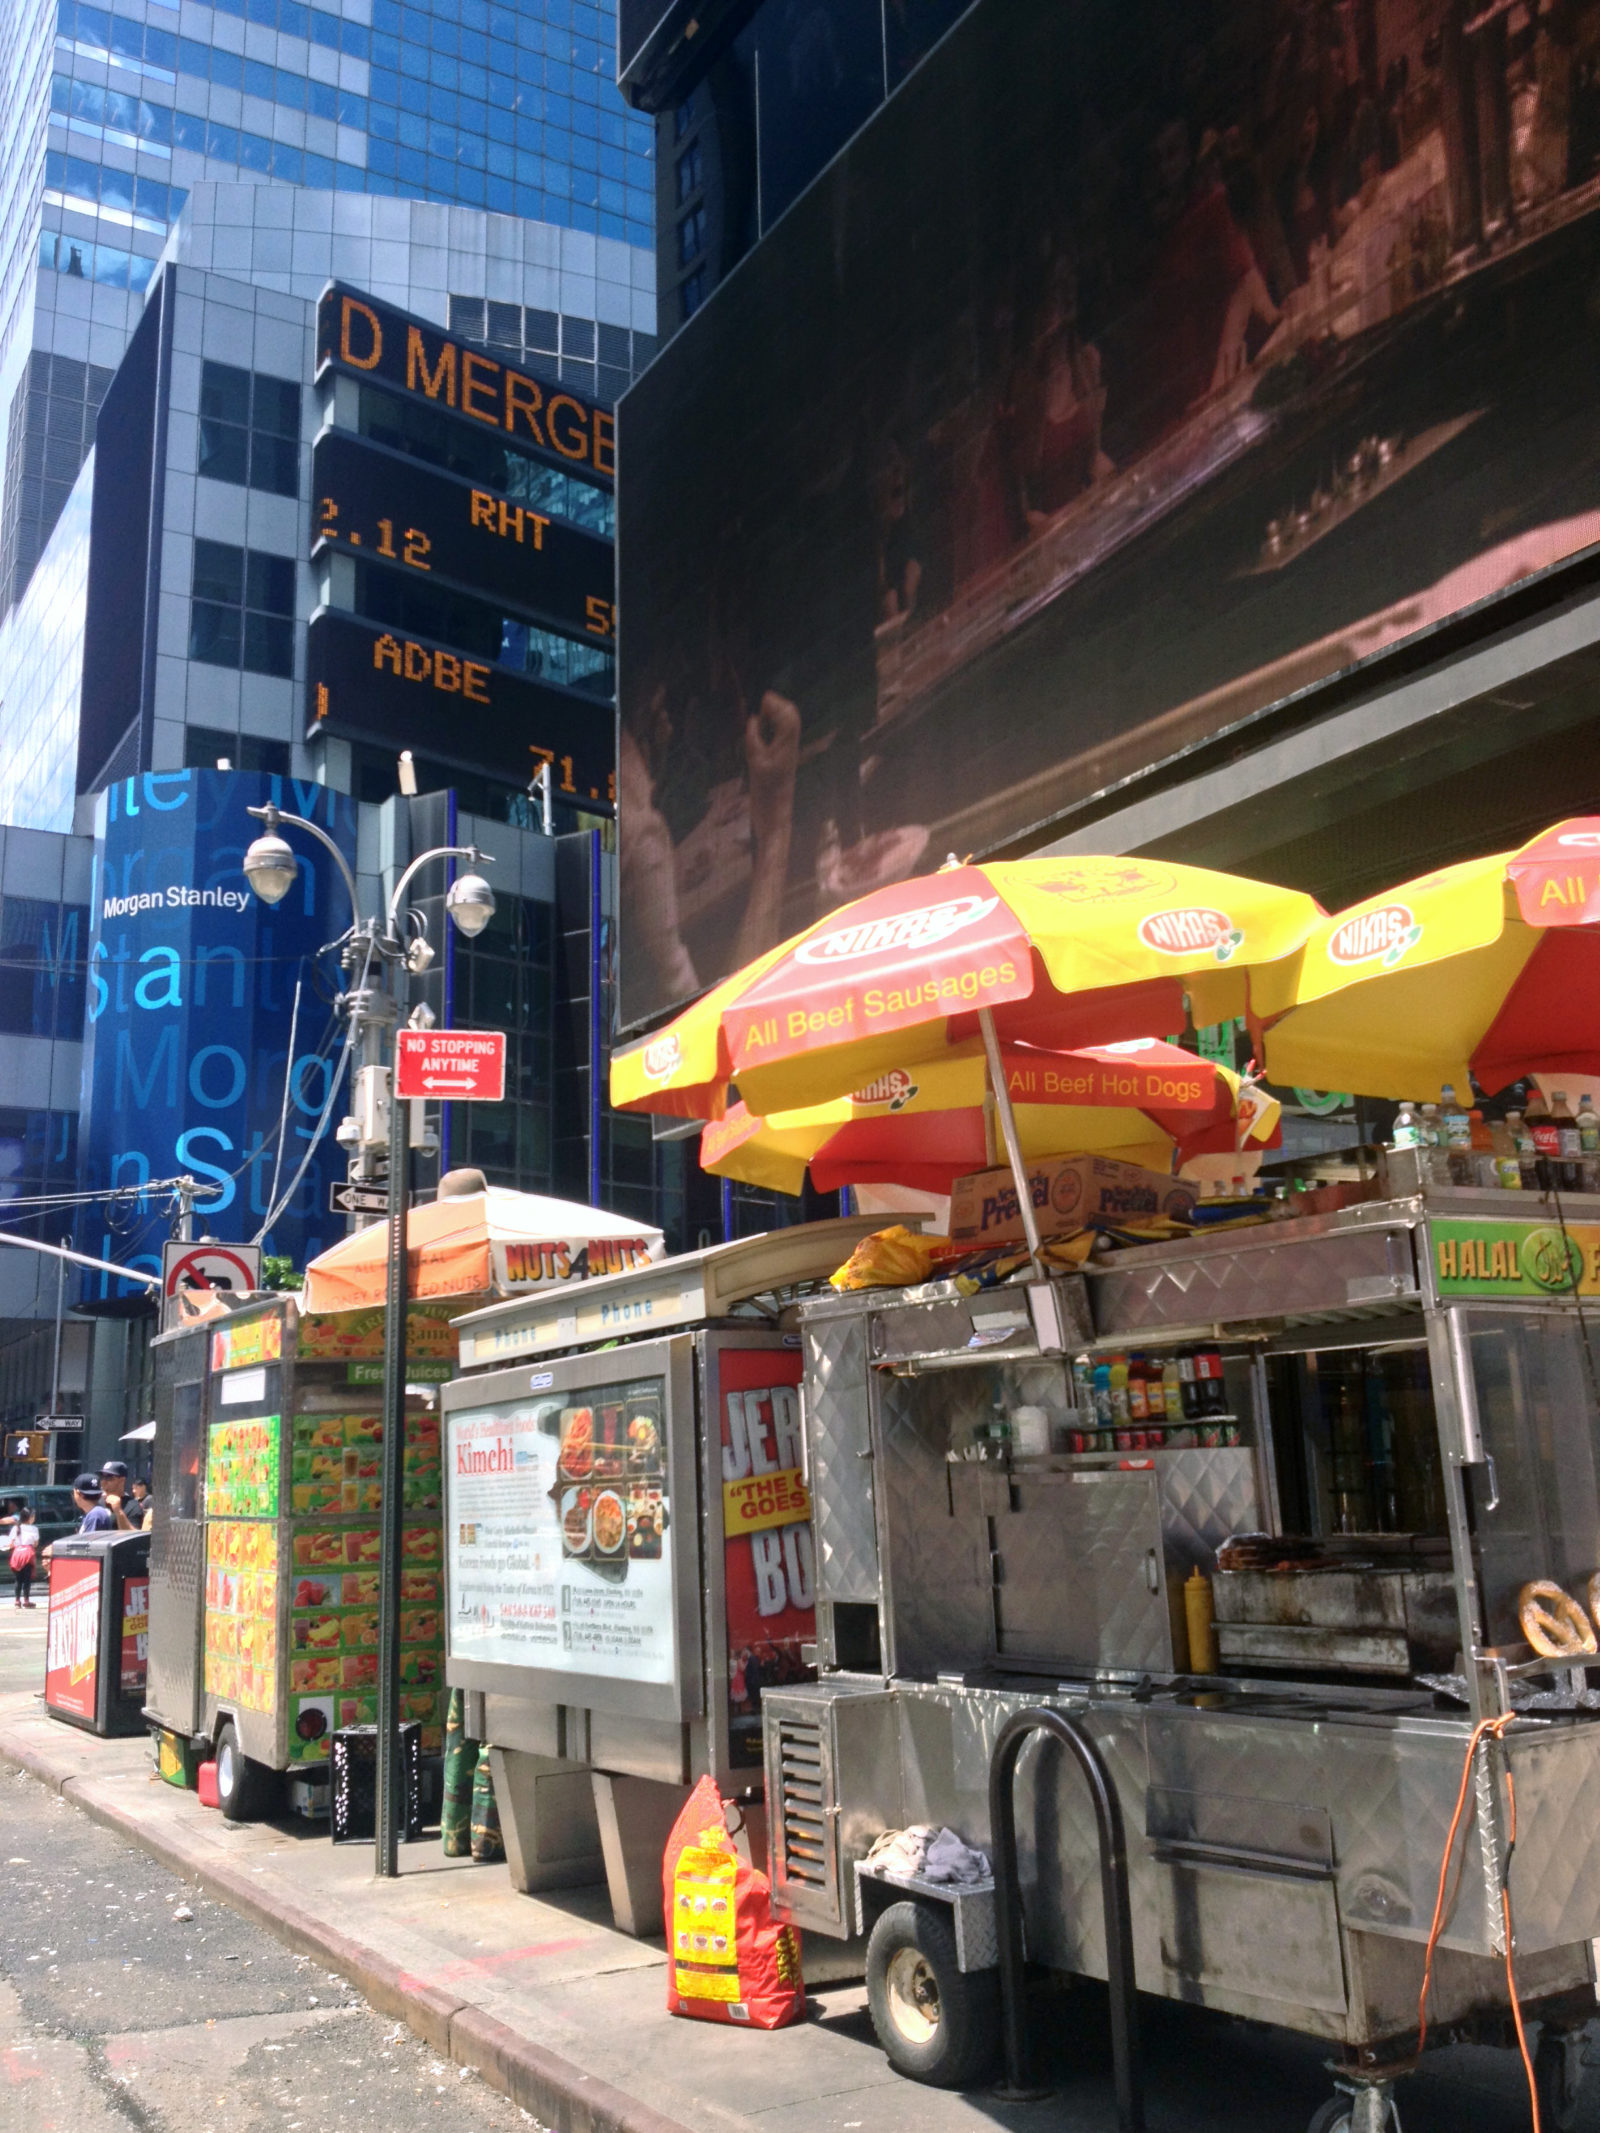 Why Are There So Many Food Carts In New York?